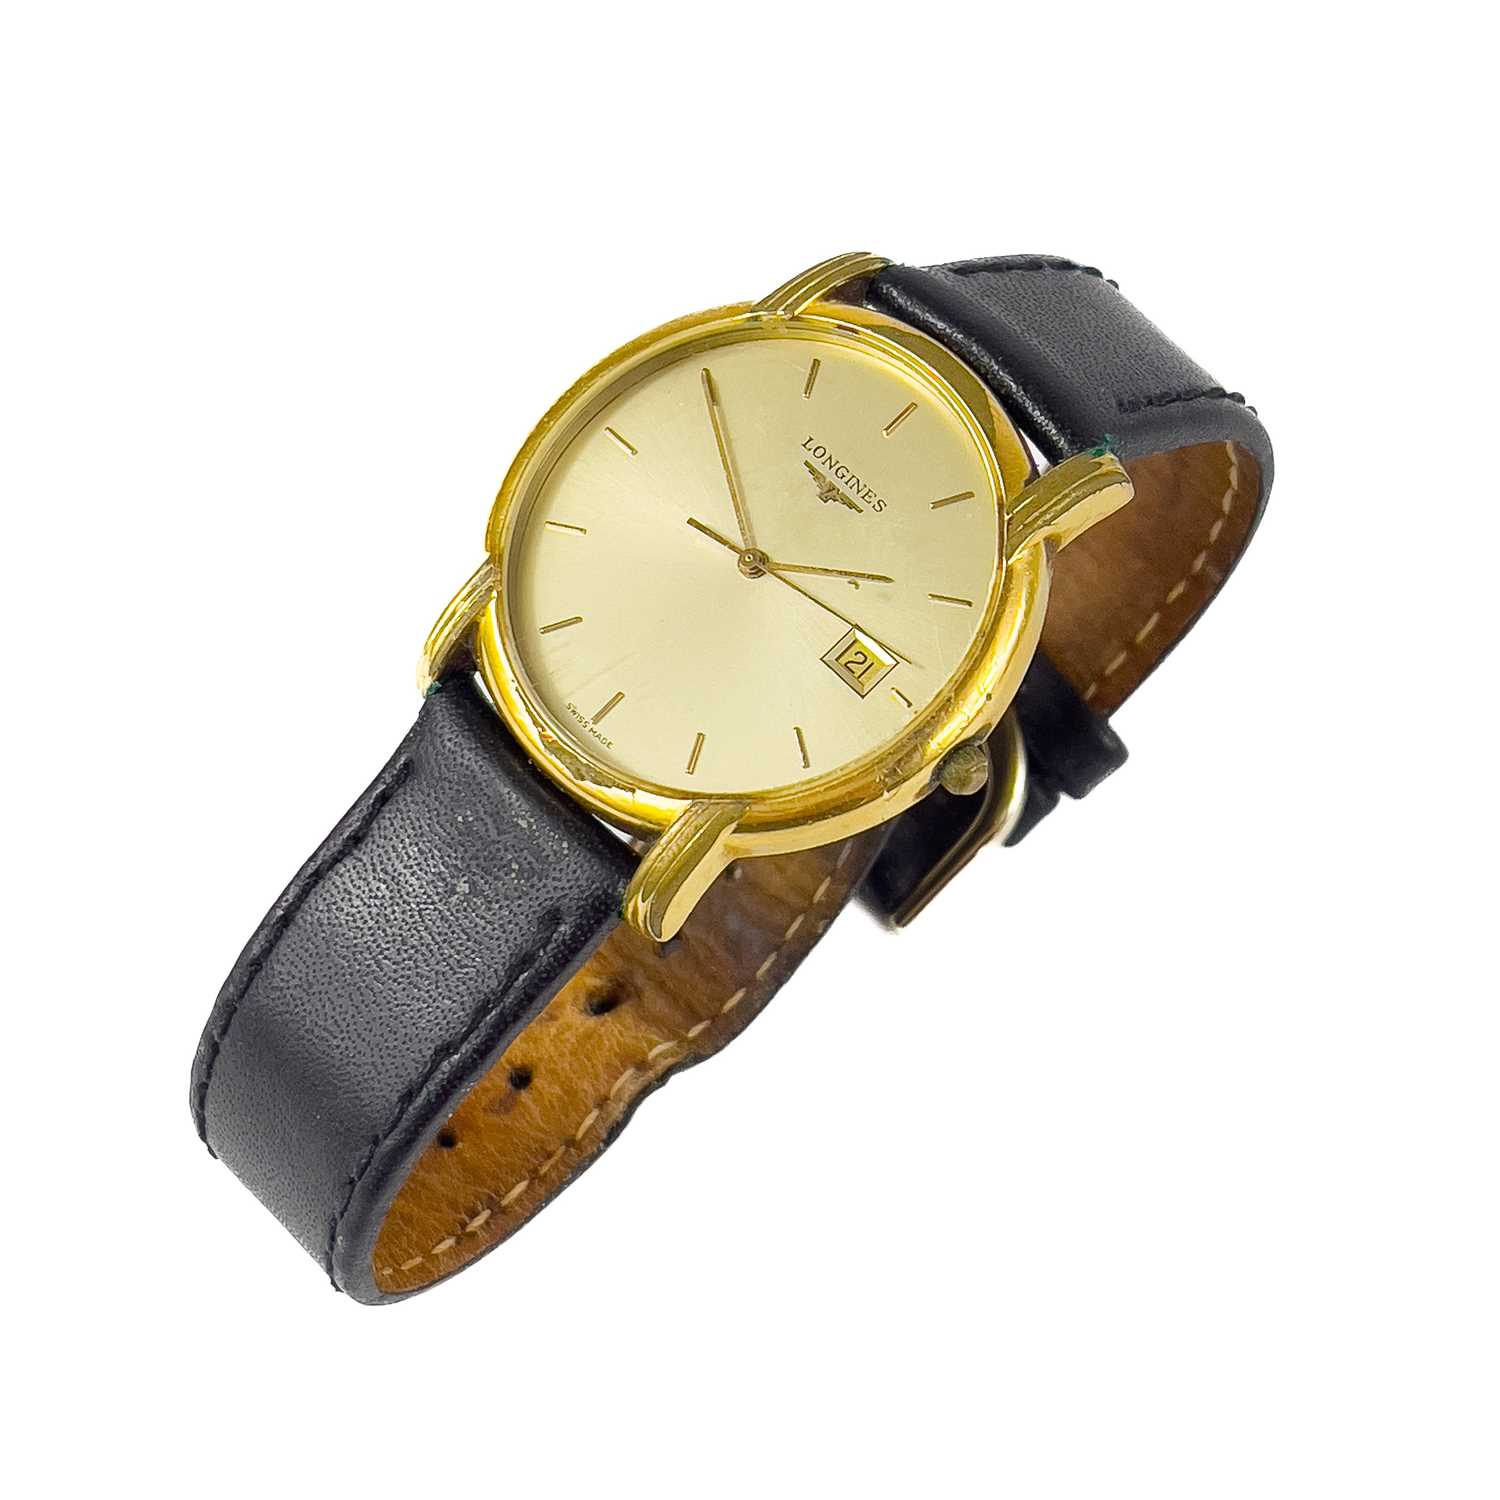 An Omega De Ville gold plated gents automatic wristwatch. - Image 5 of 7